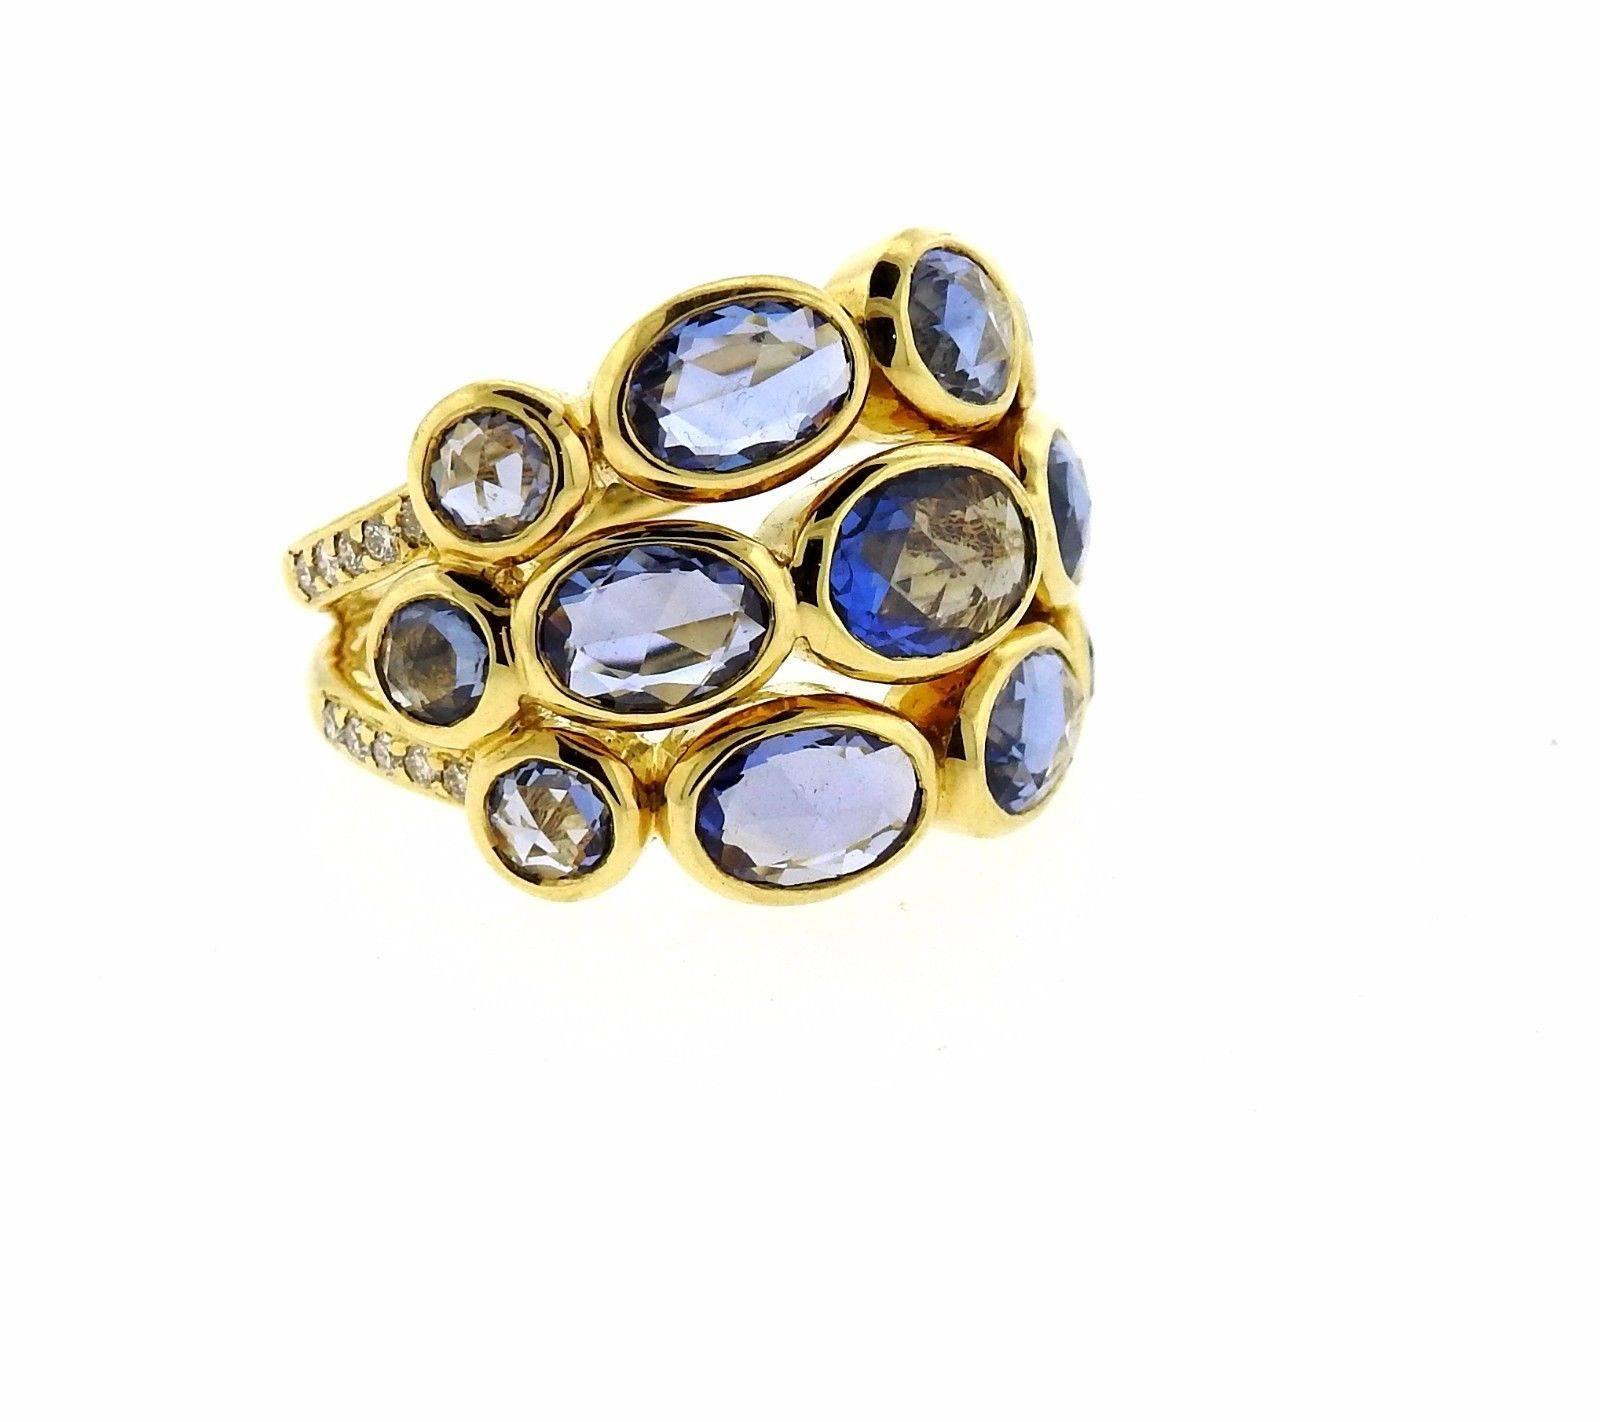 An 18k yellow gold ring set with rose cut blue sapphires and 0.23ctw of G/VS diamonds.  The ring is a size 6.75. Ring top is 17.8mm at widest point.  Marked:	Temple mark, 750.  The weight of the piece is 14.5 grams. The retail is $5950.